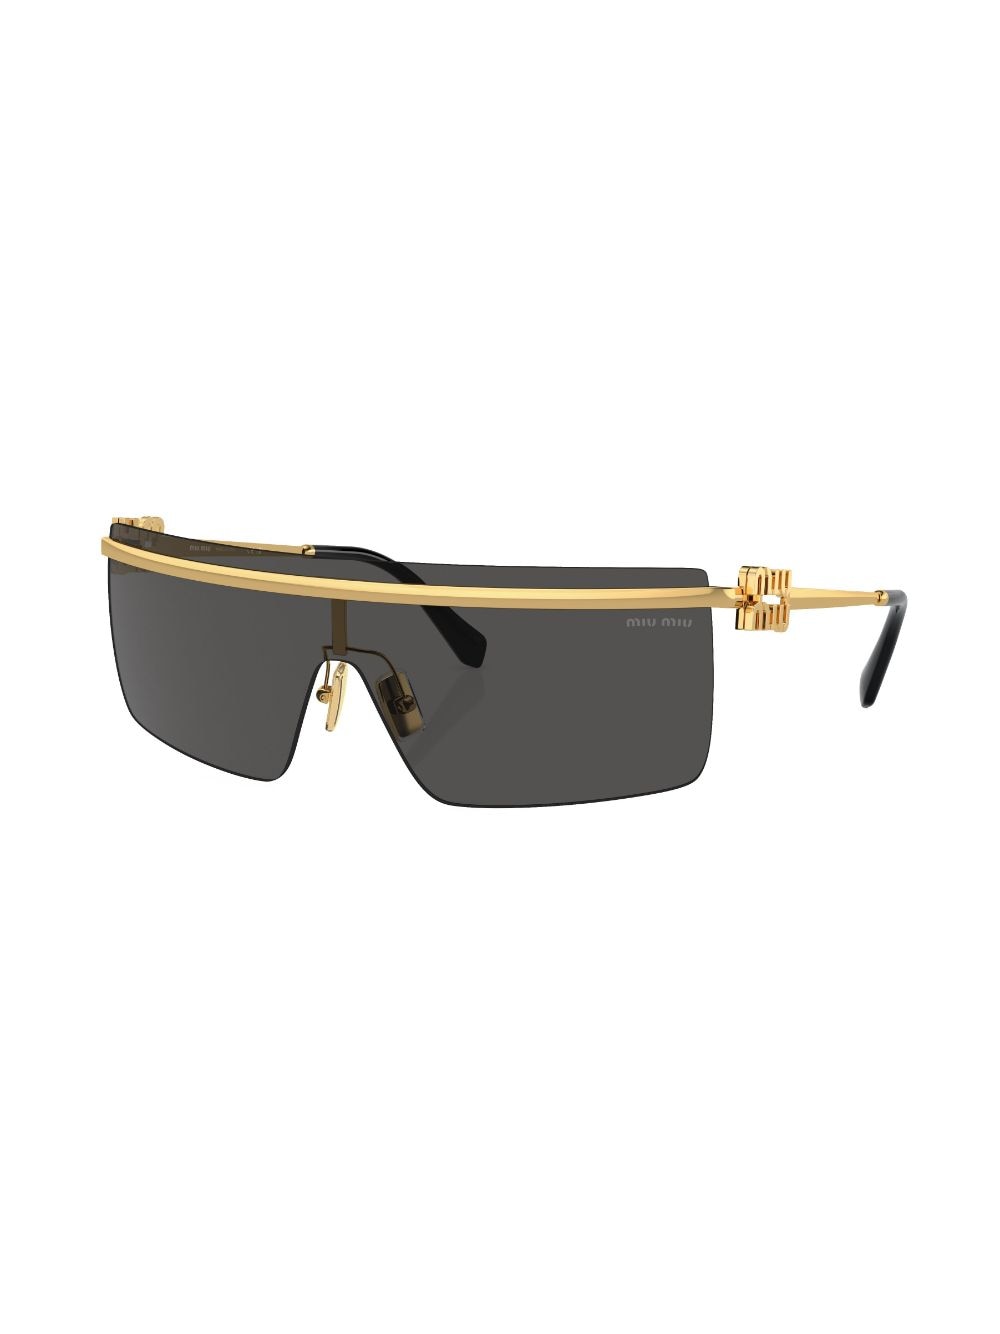 Rimless tinted sunglasses<BR/><BR/>